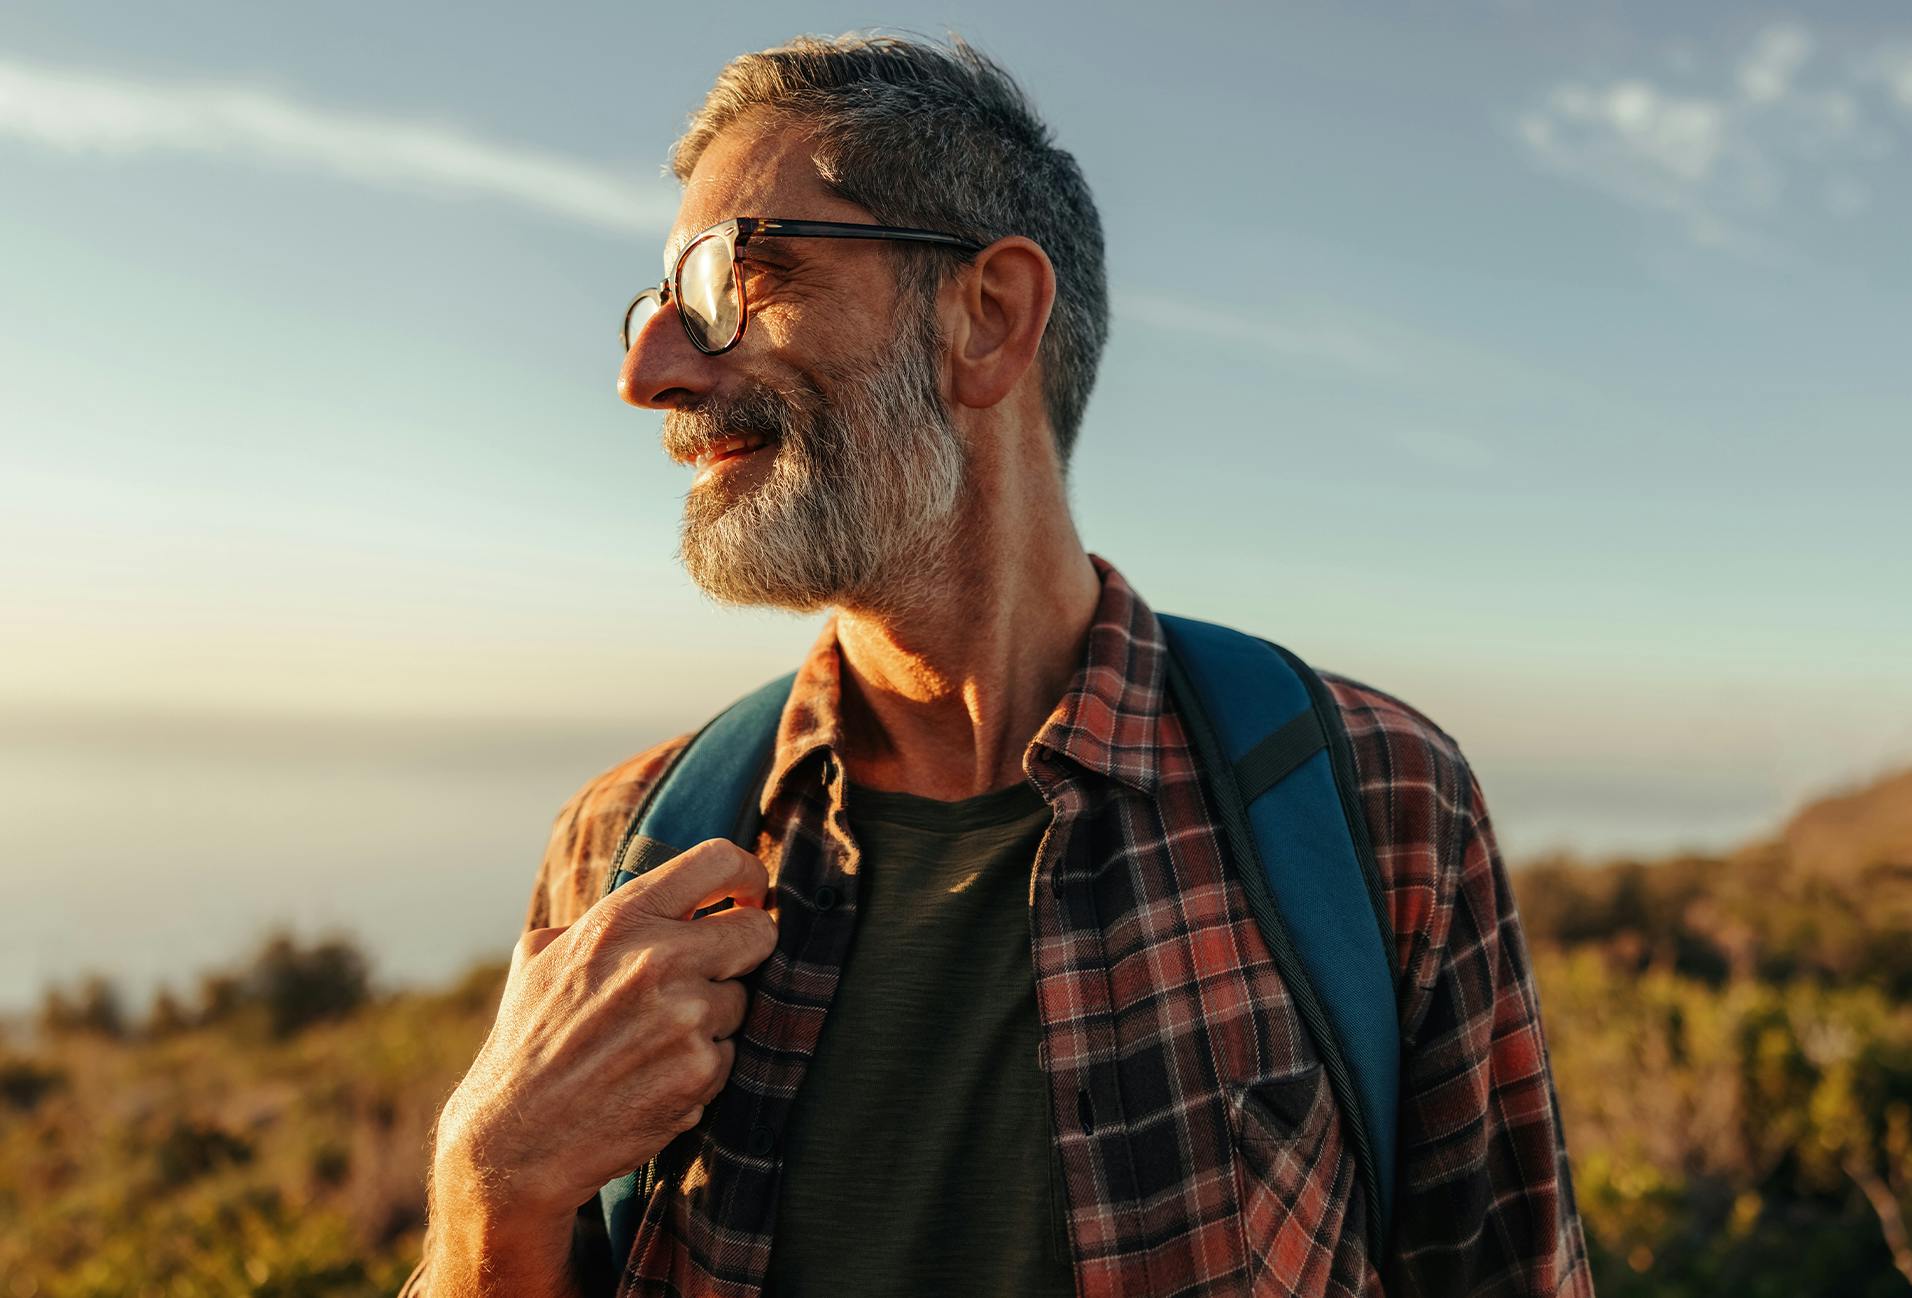 there is a man with a beard and glasses standing on a hill